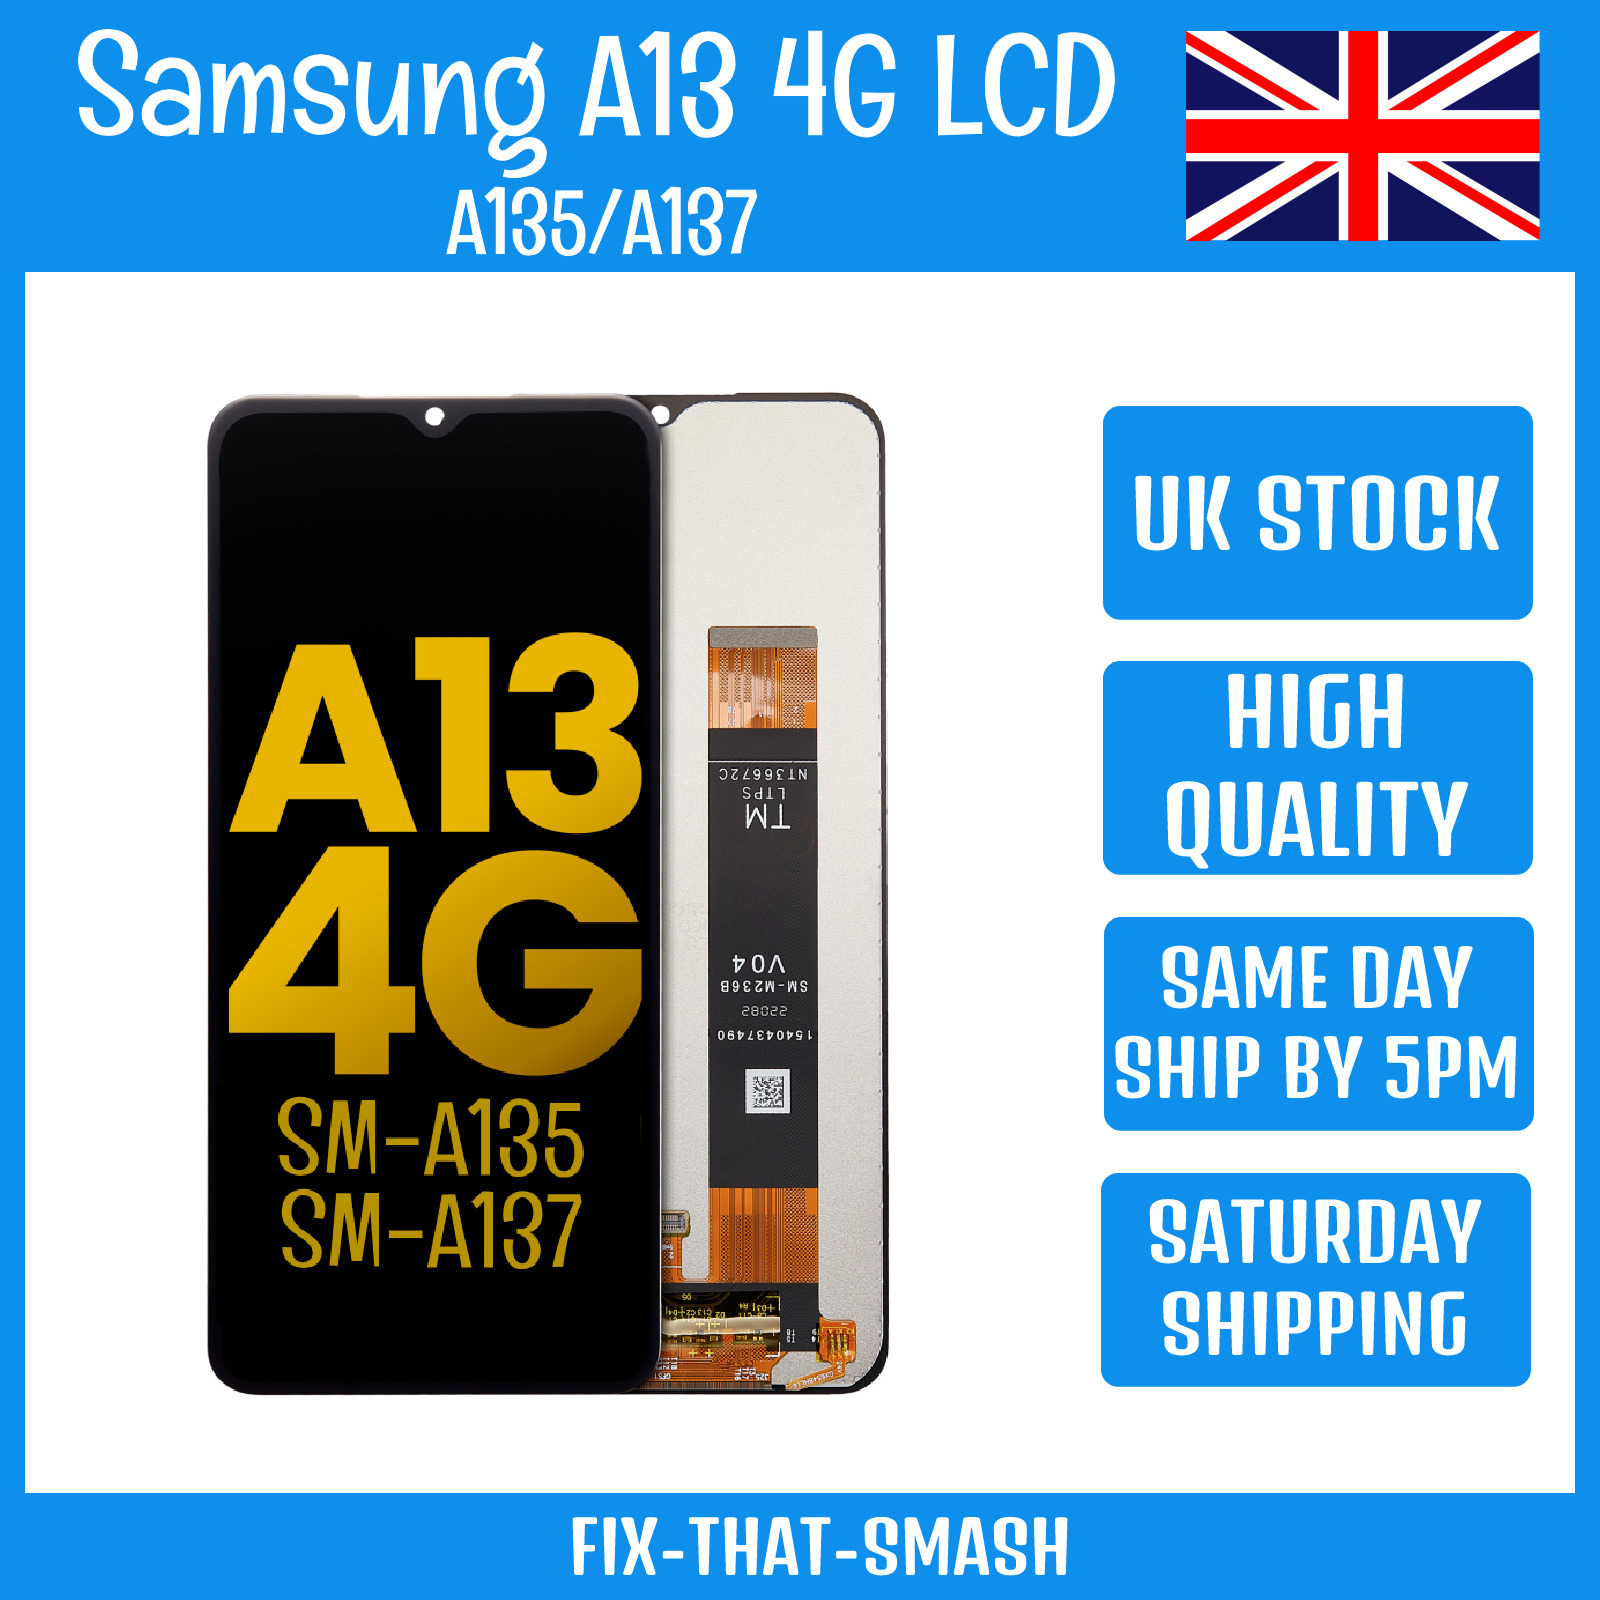 Samsung Galaxy A13 4G (SM-A135/A137) LCD Screen Display Touch Digitizer Assembly